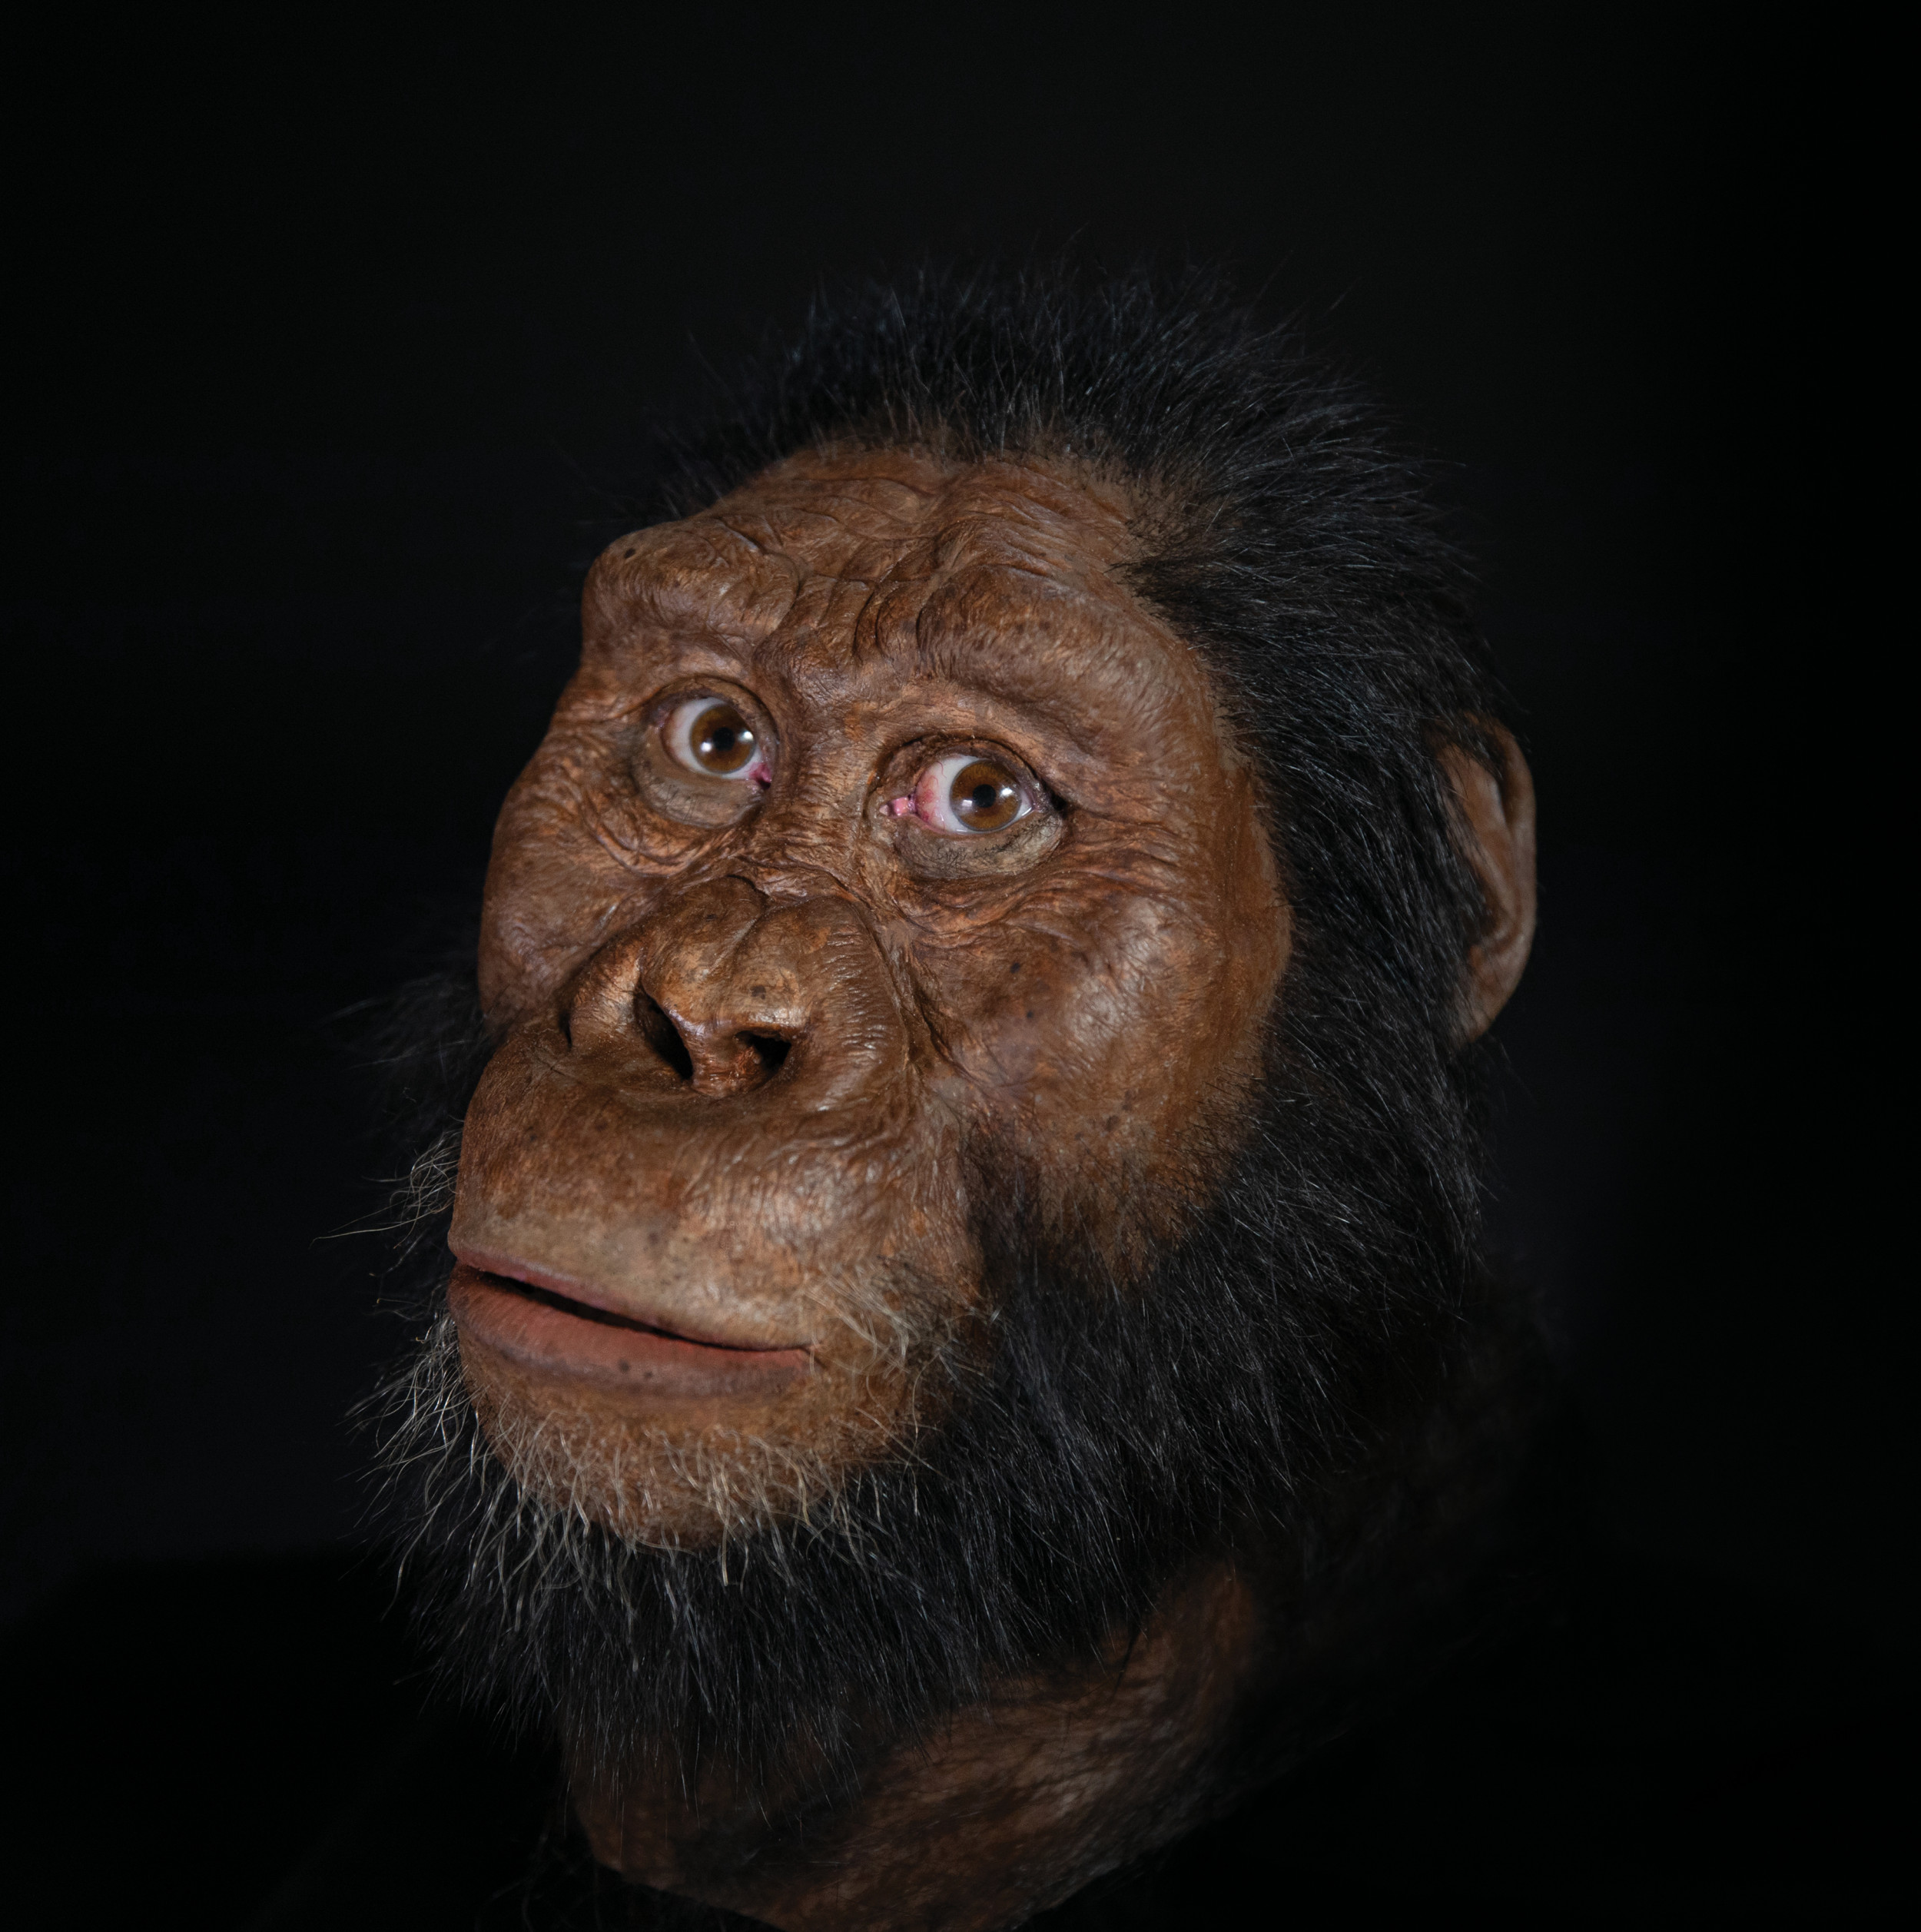 Face of Ancient Human Ancestor That Lived 3.8 Million Years Ago